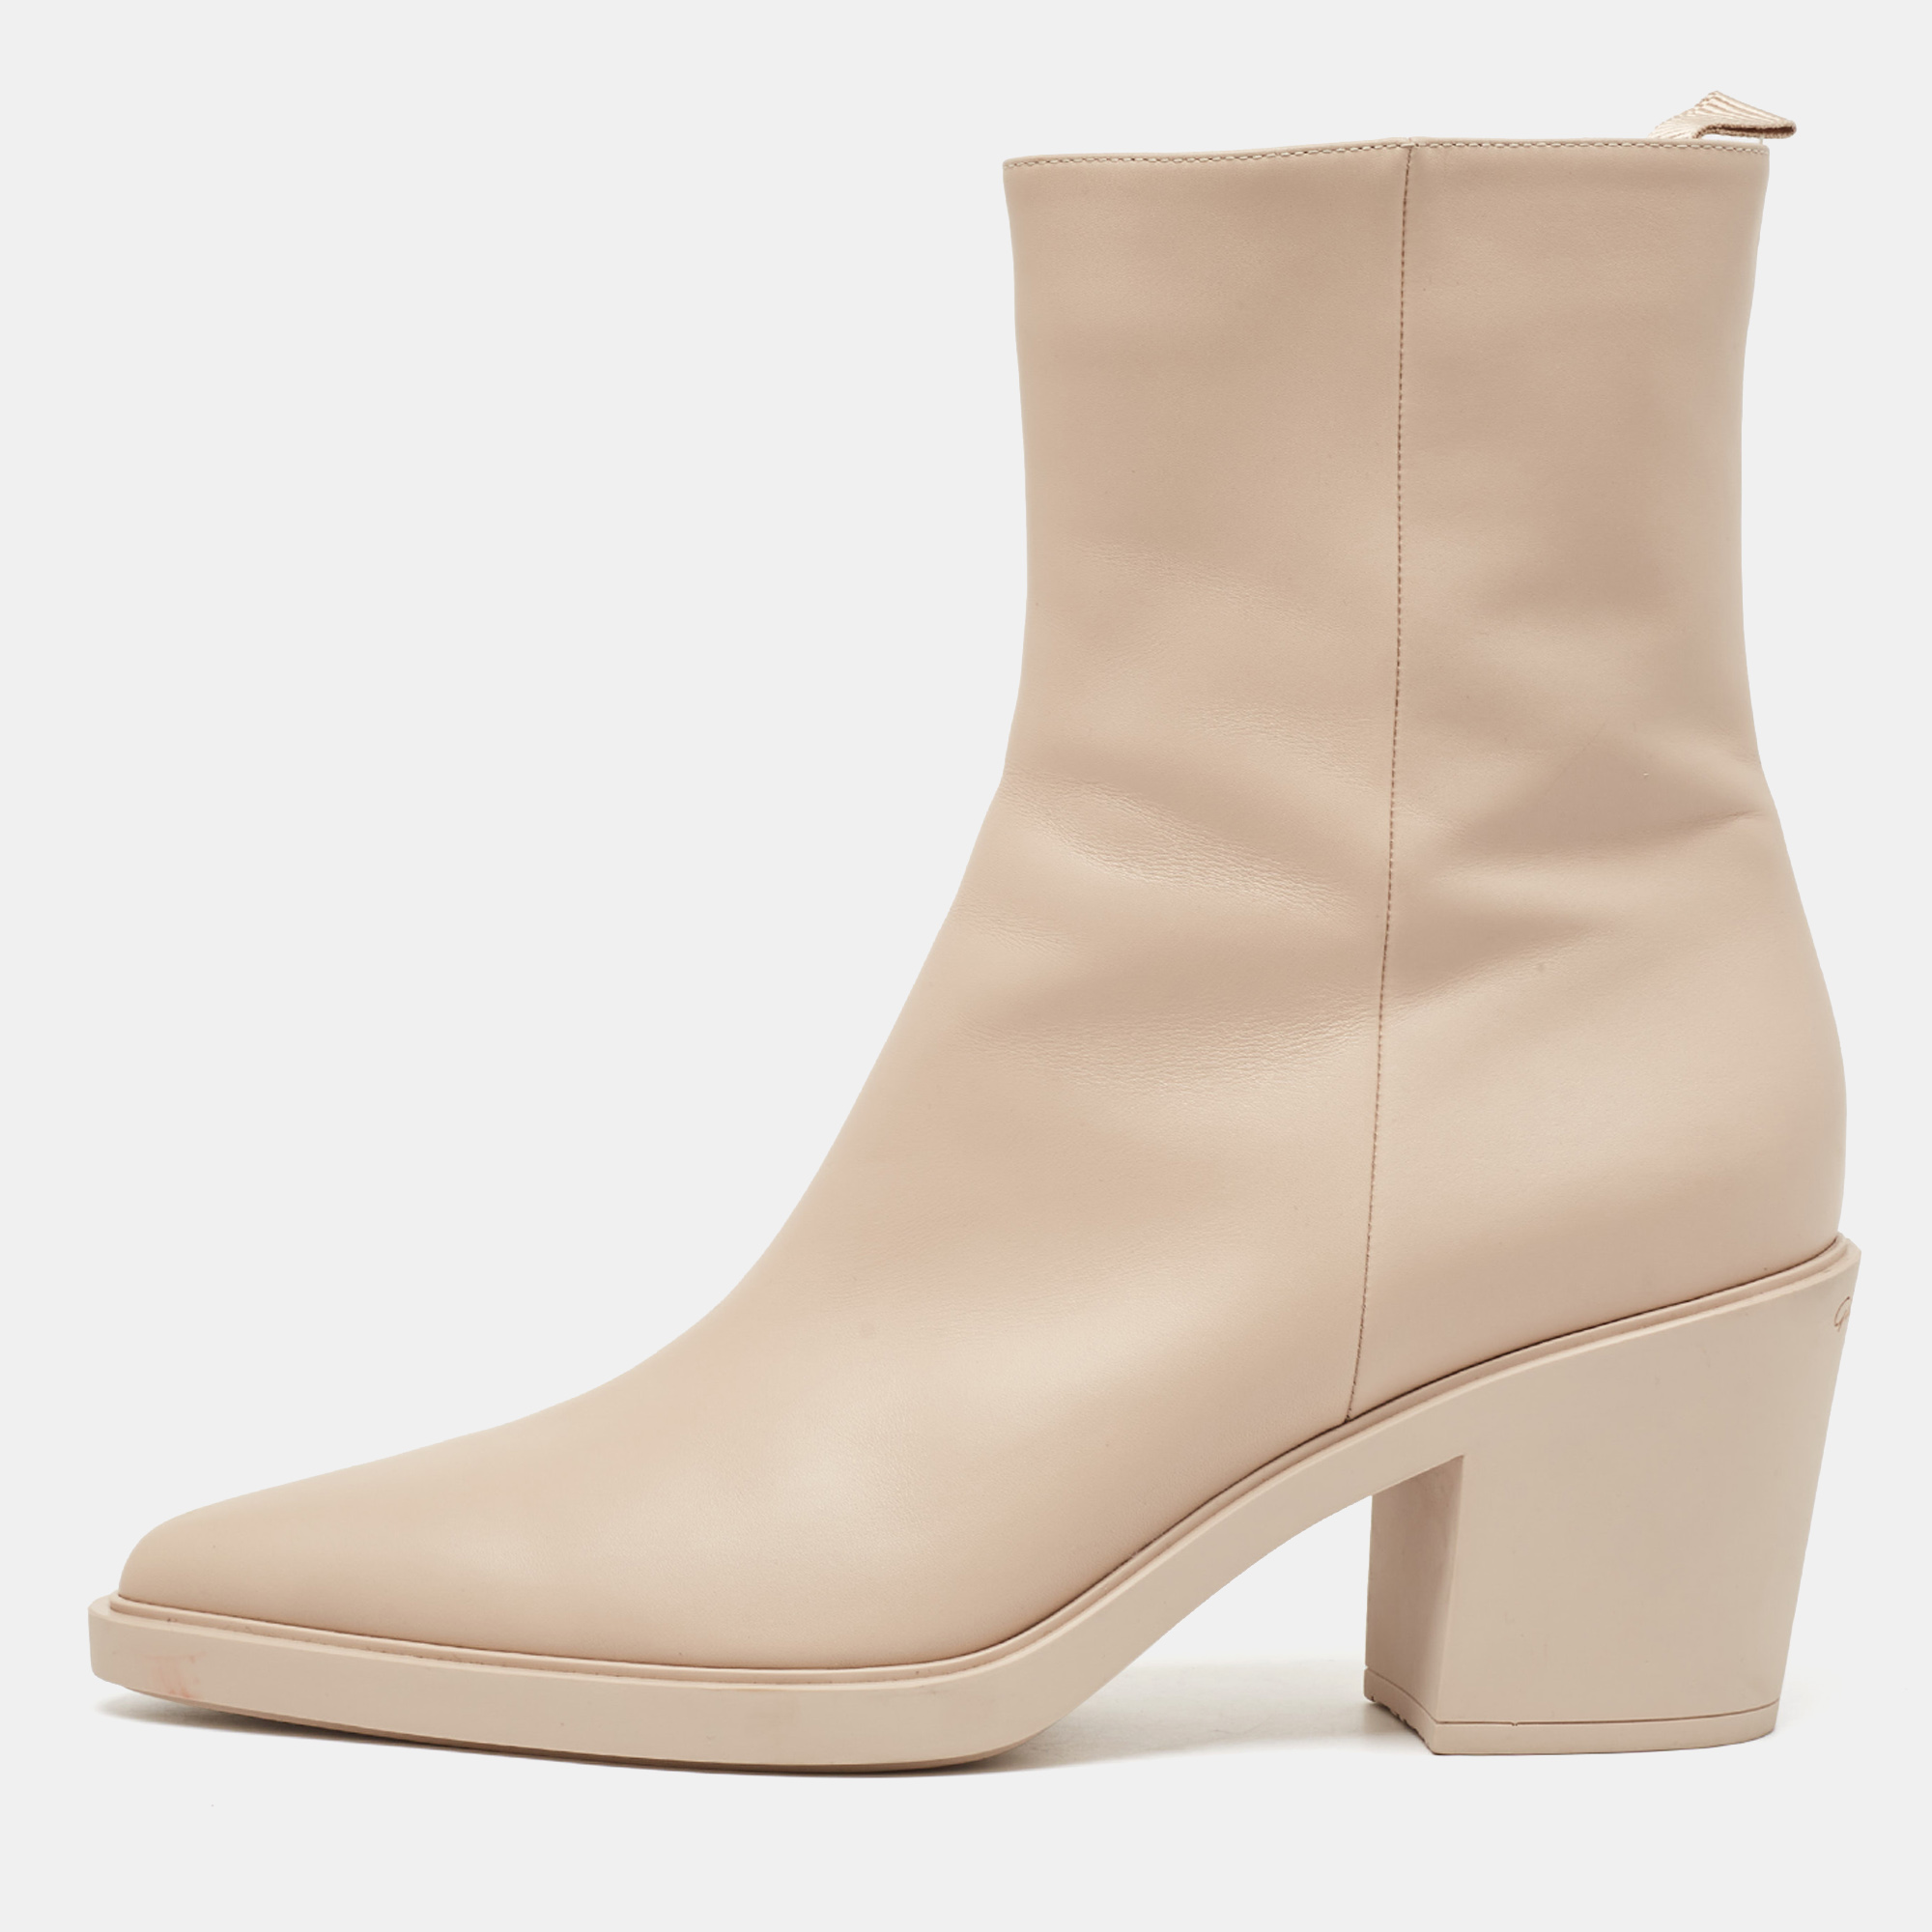 Gianvito rossi beige leather dylan ankle boots size 41.5